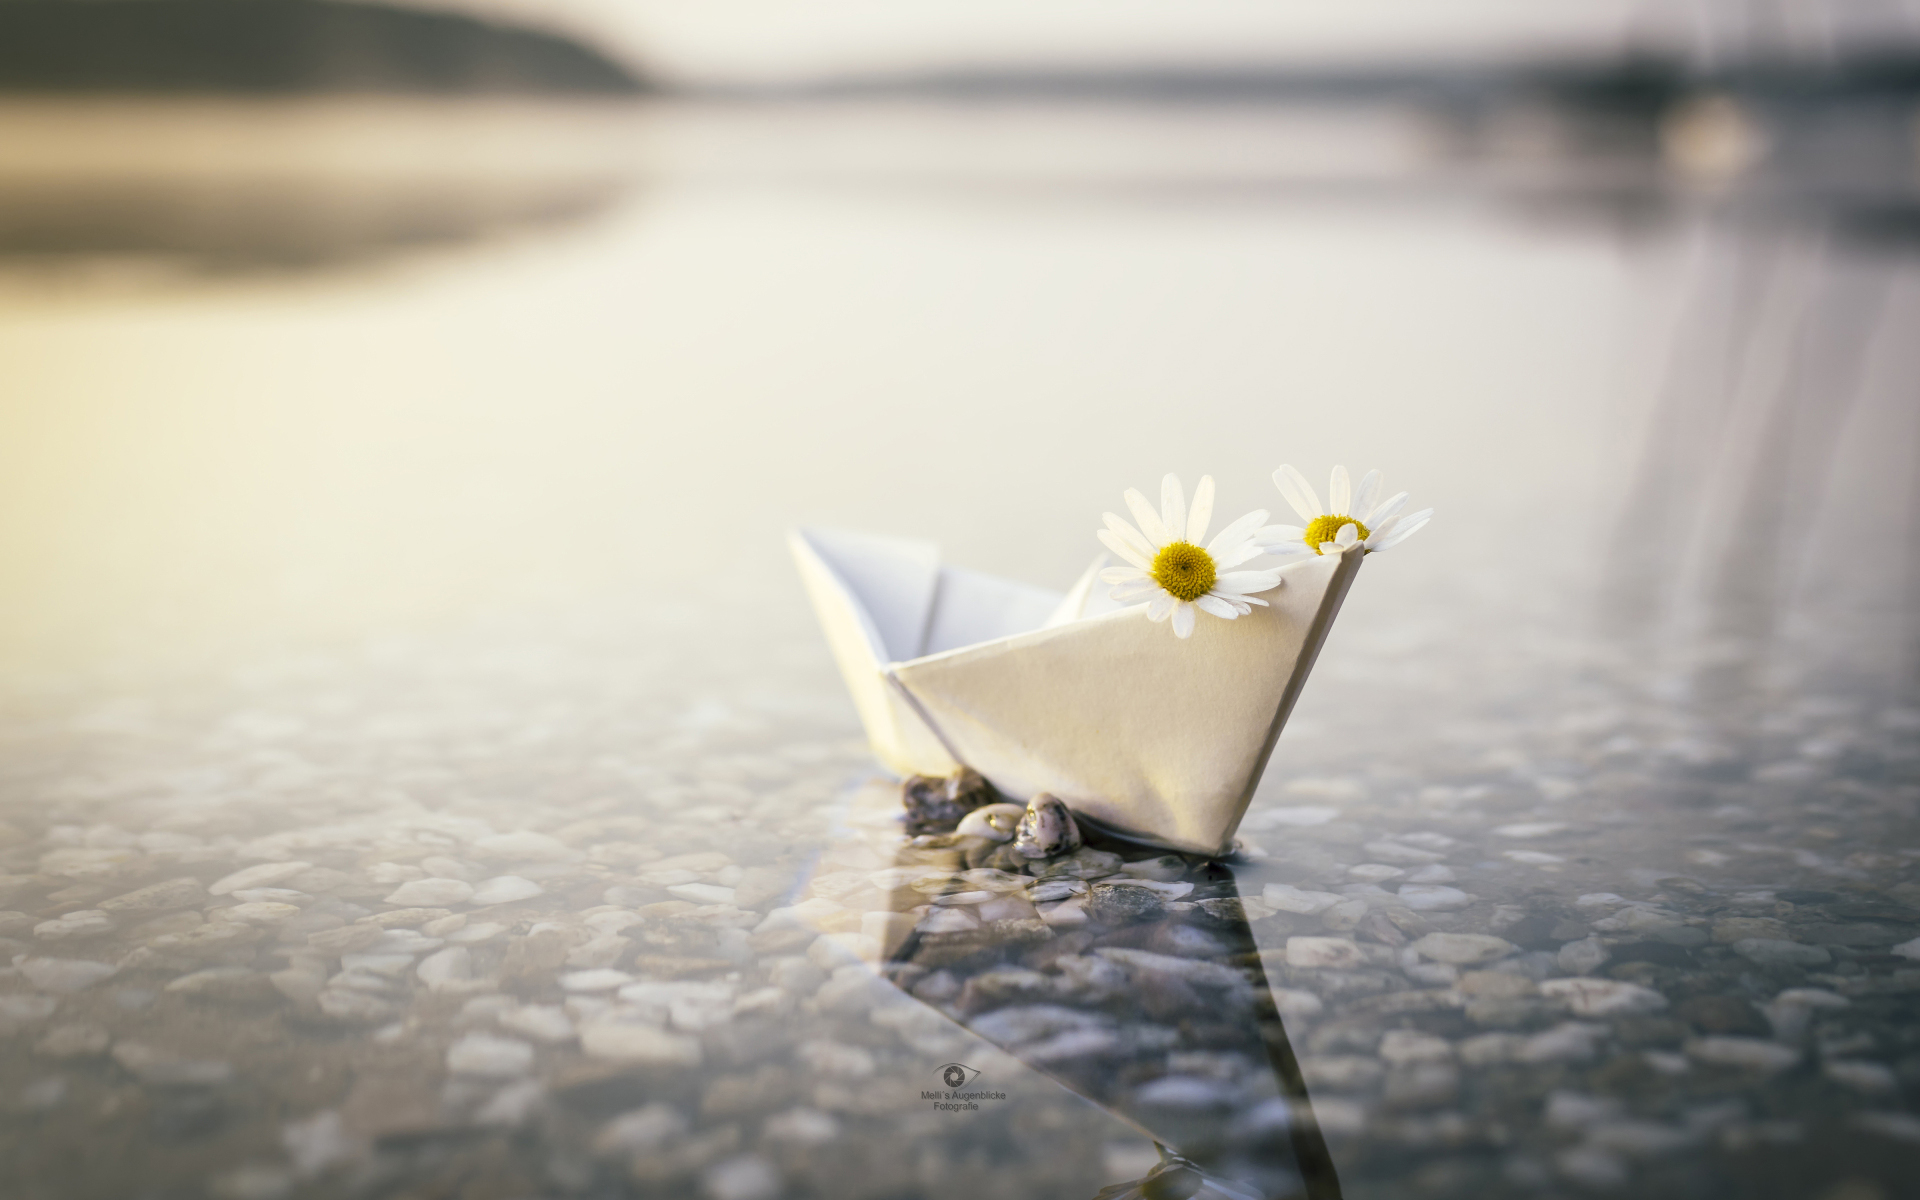 man made, origami, chamomile, paper boat, reflection, water